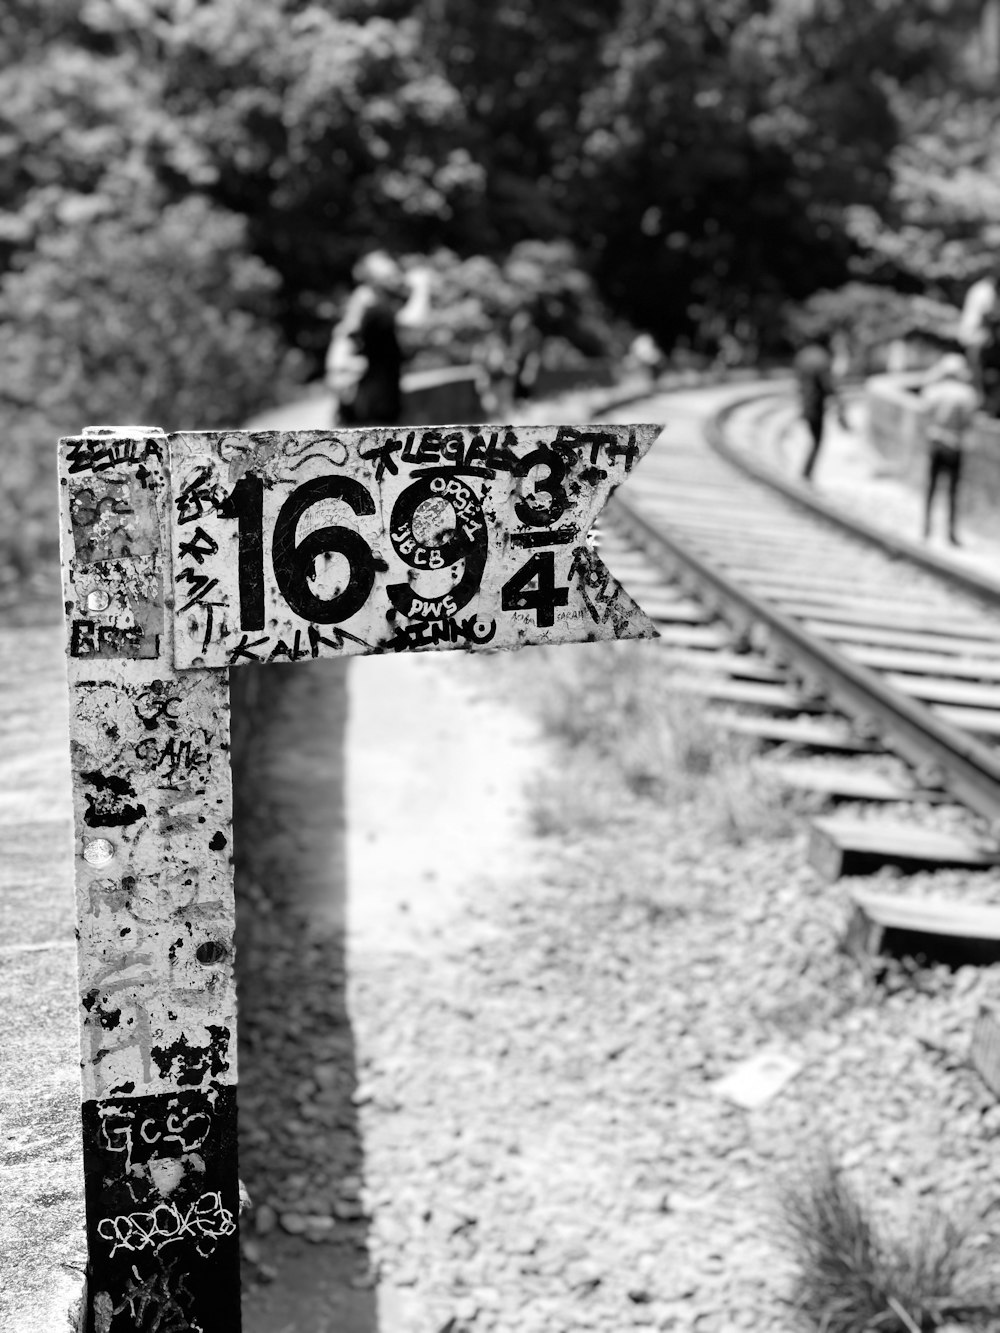 grayscale photo of train 169 3/4 signage